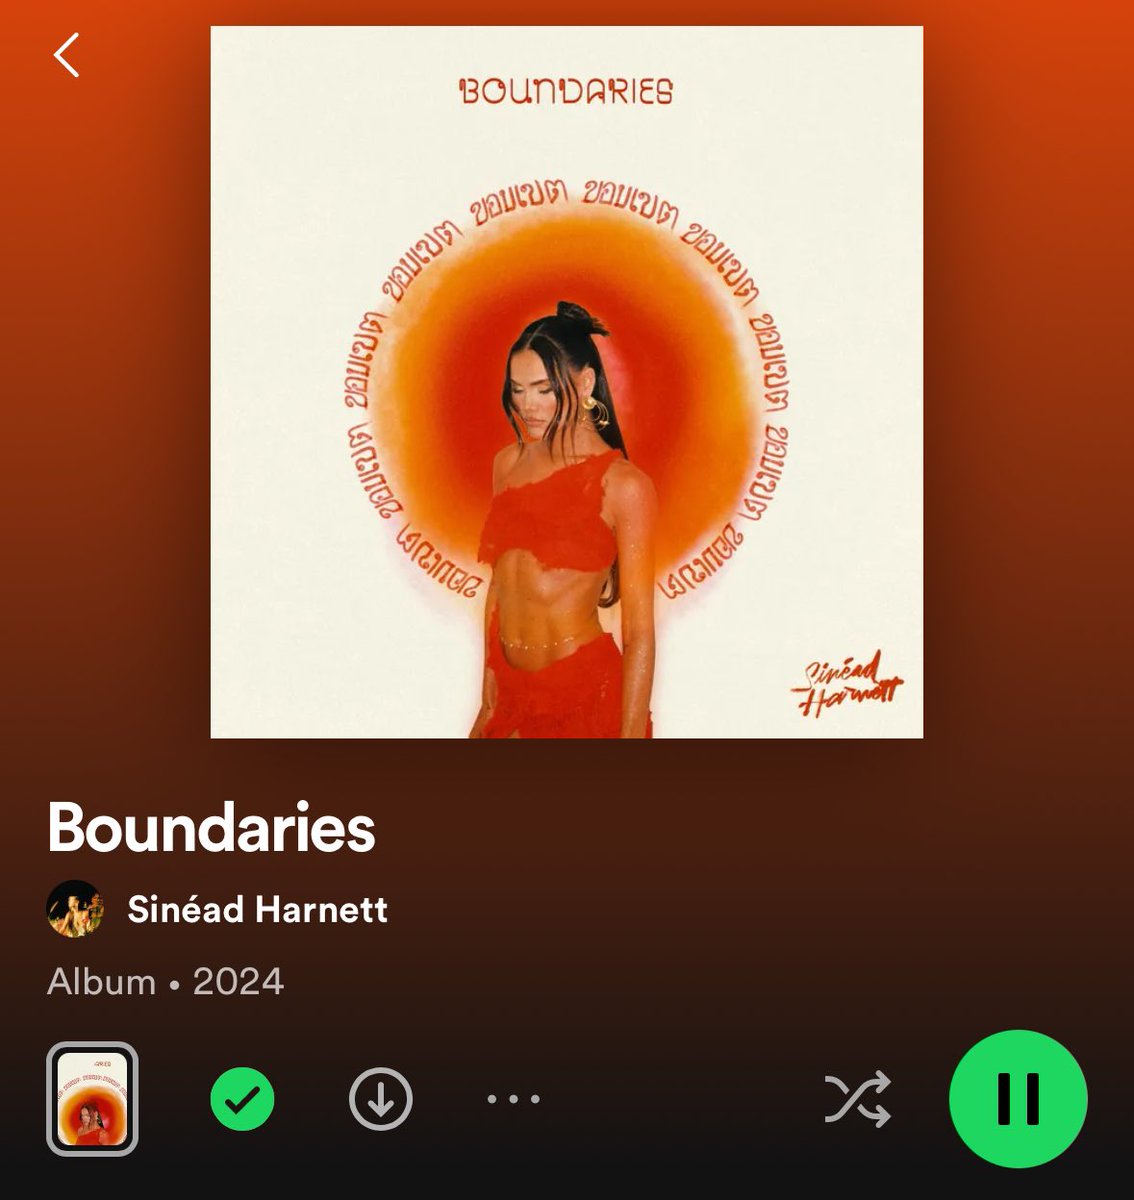 For the R&B lovers, Sinéad dropping a great project today, highly recommend